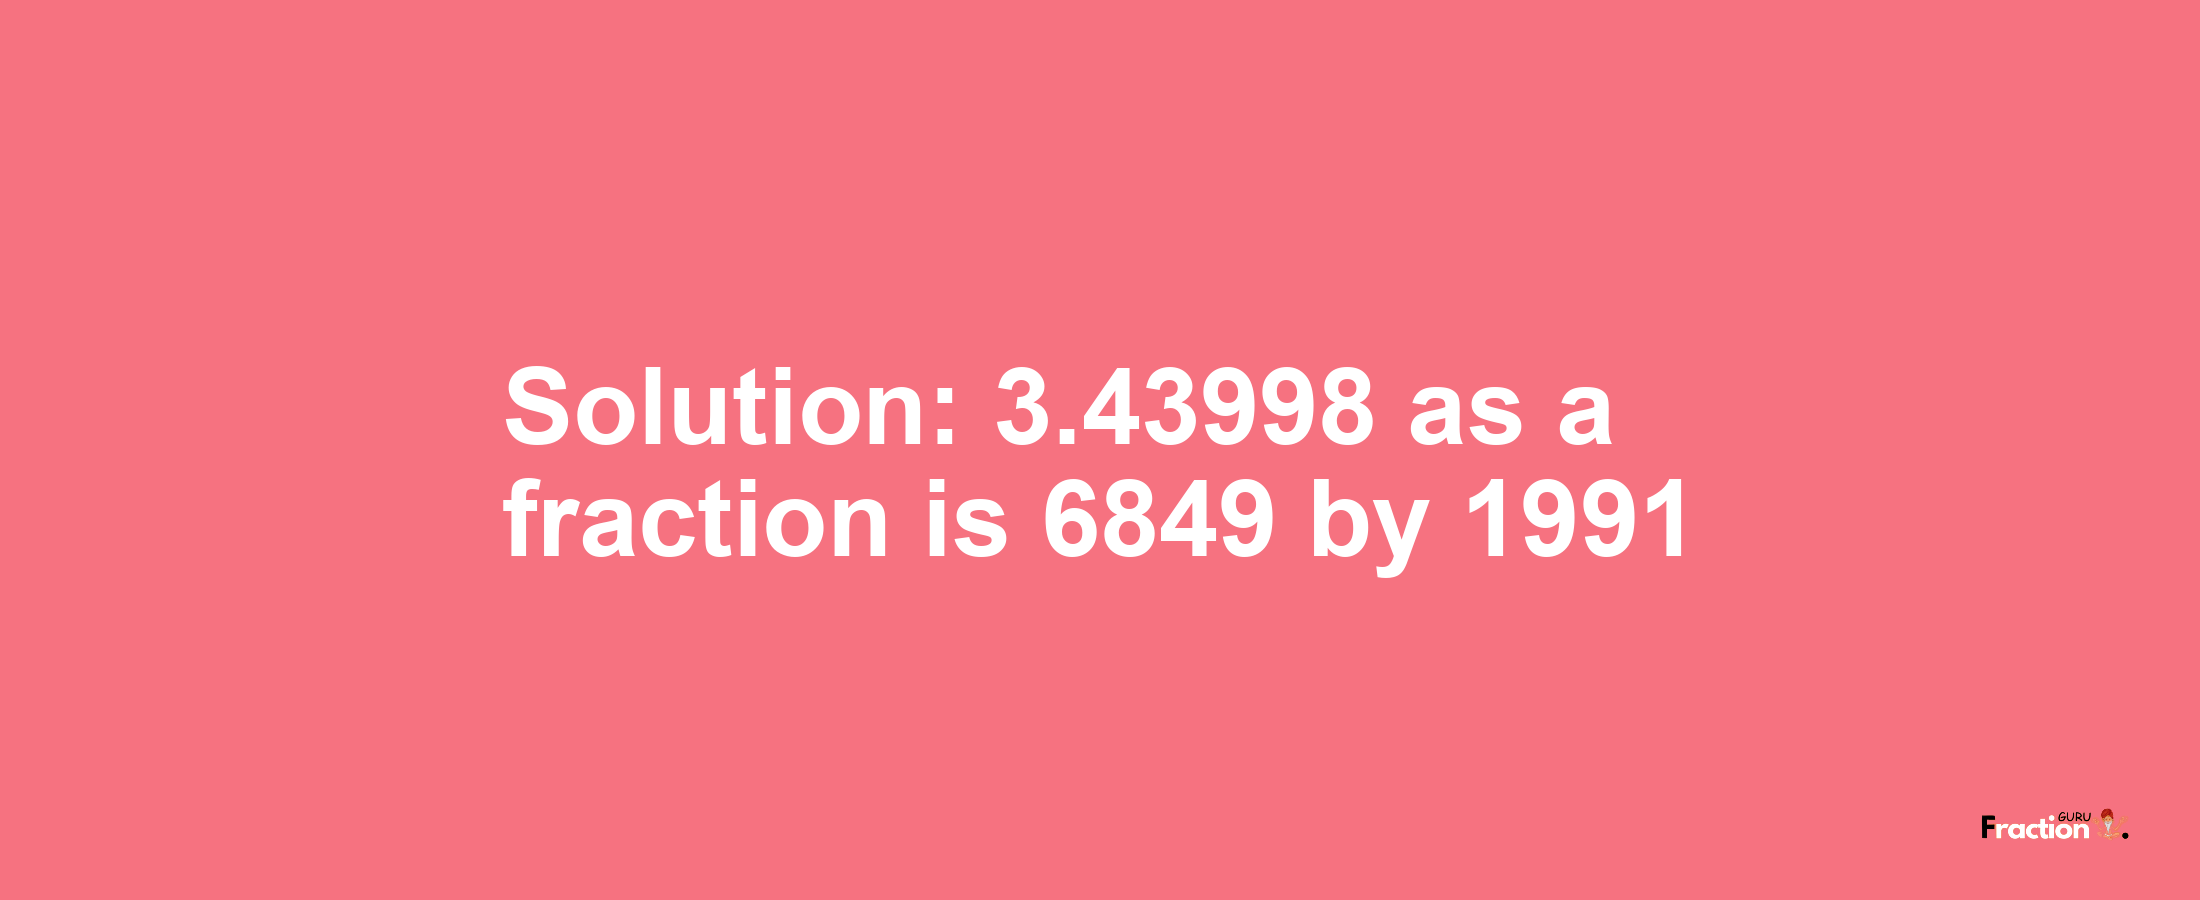 Solution:3.43998 as a fraction is 6849/1991